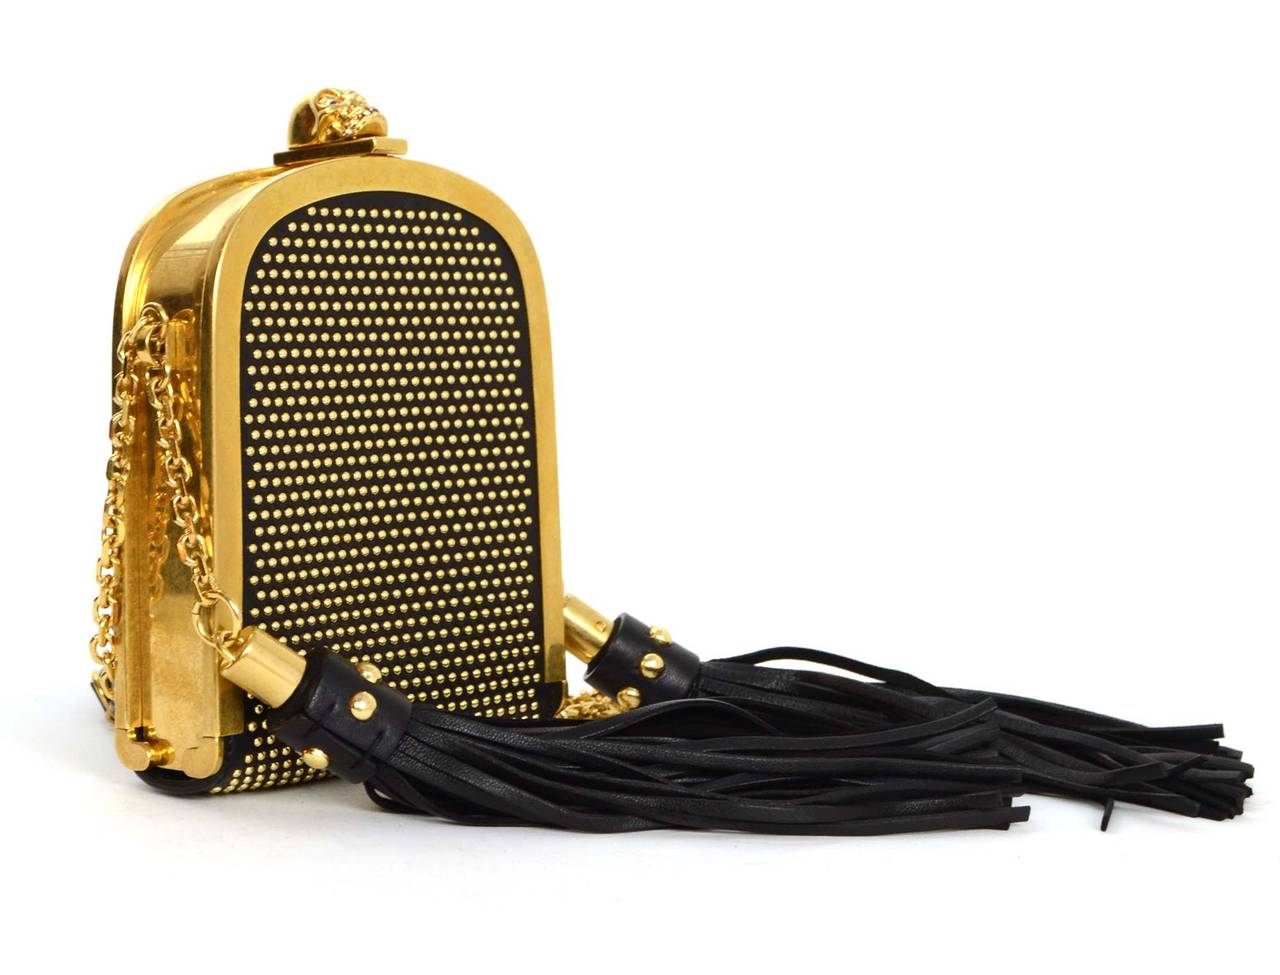 Alexander McQueen Black Leather Gold Studded Tassel & Skull Evening Bag
Features large tassels on either side of bag and iconic McQueen skull with crystal detailing at top opening
Made in: Italy
Color: Black and goldtone
Hardware: